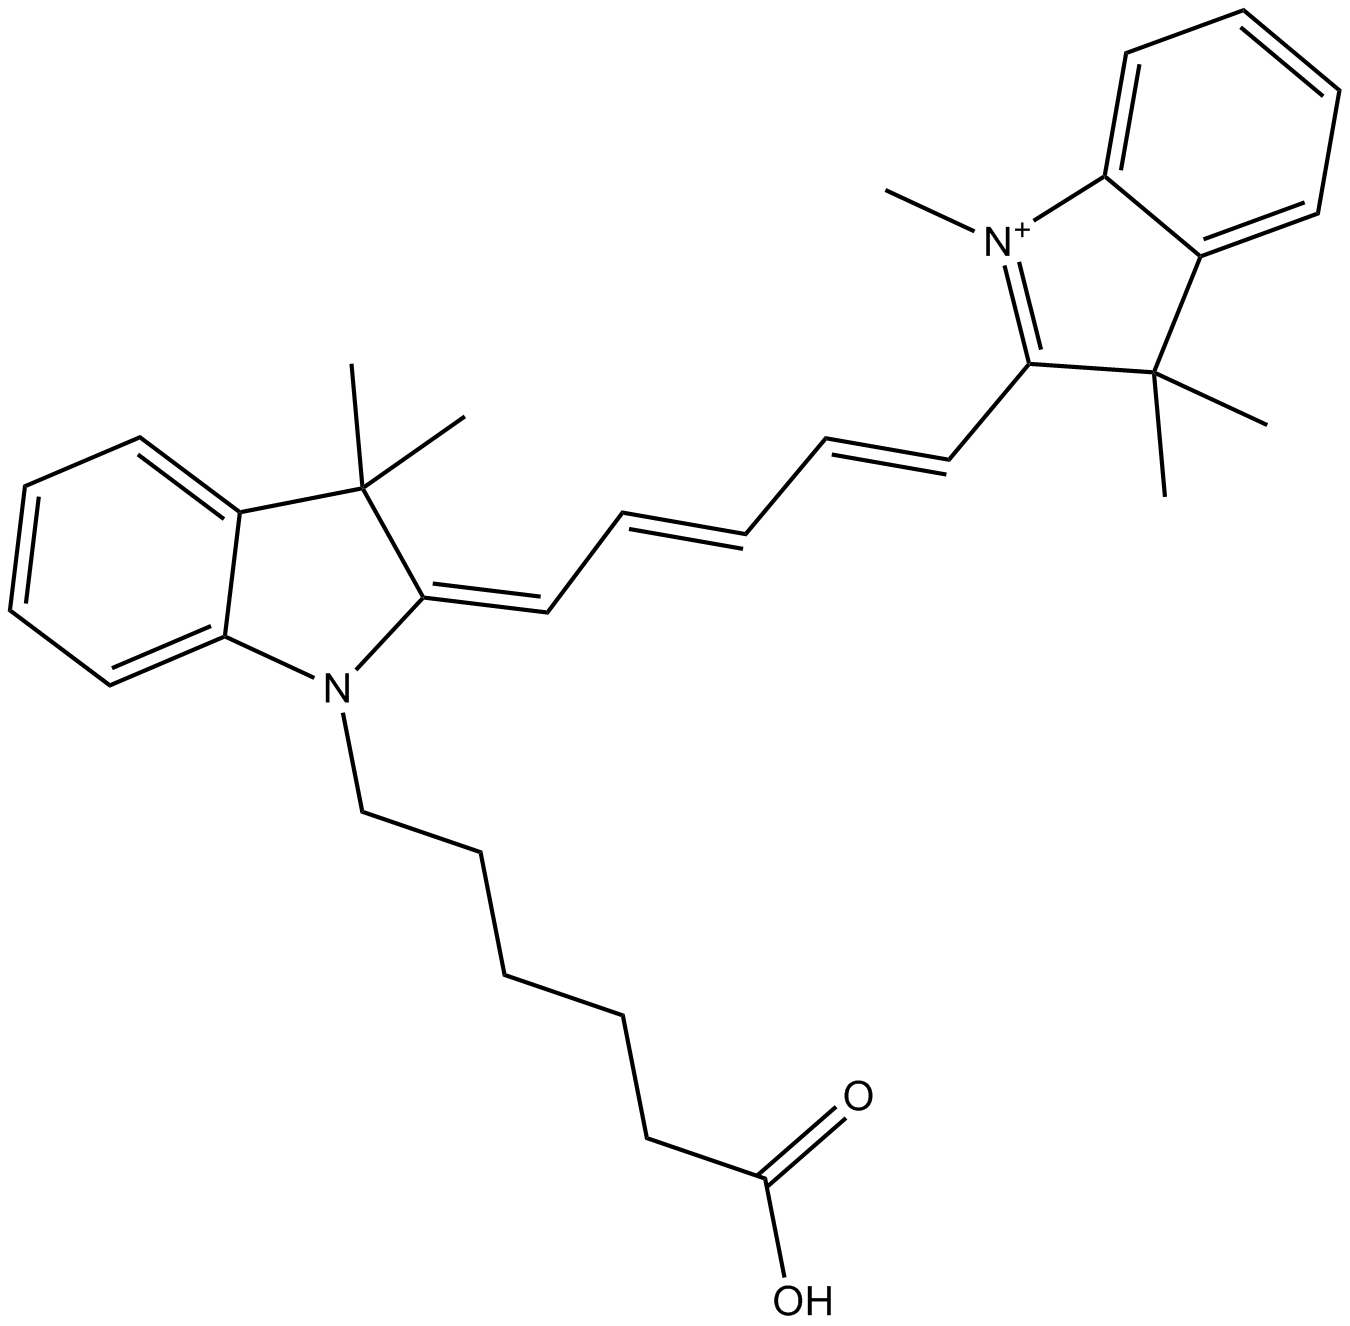 Cy5 carboxylic acid (non-sulfonated)